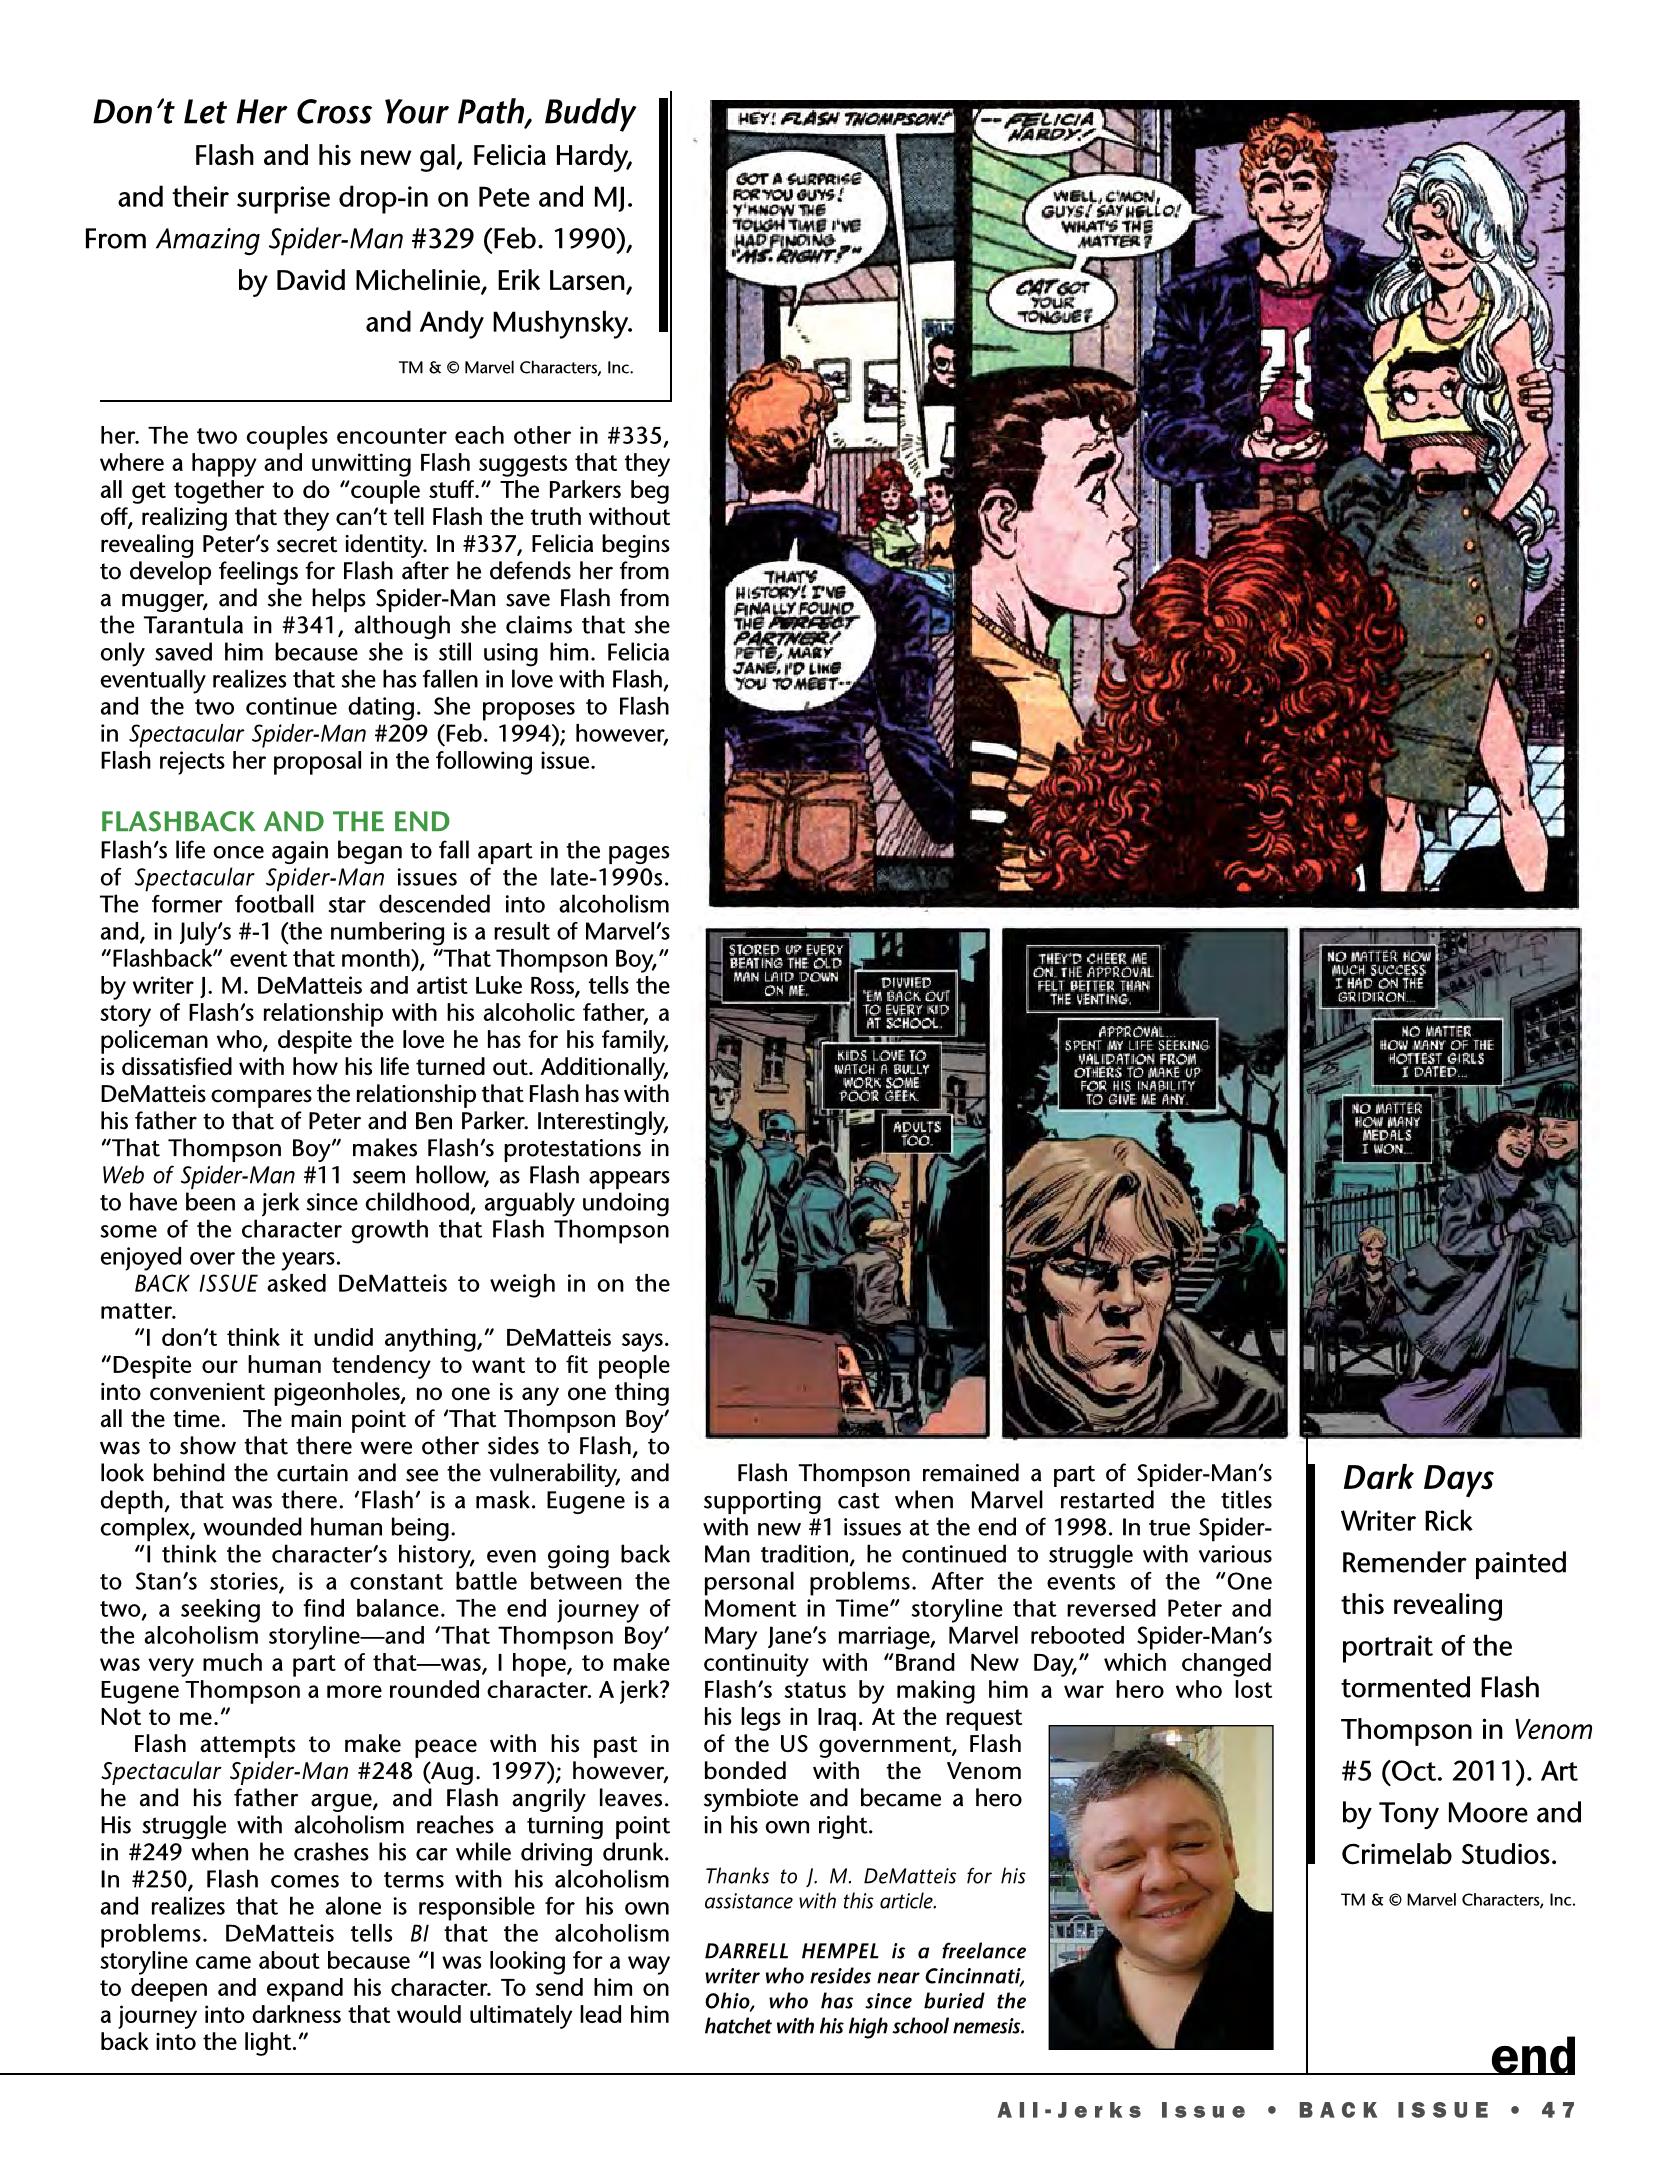 Read online Back Issue comic -  Issue #91 - 44